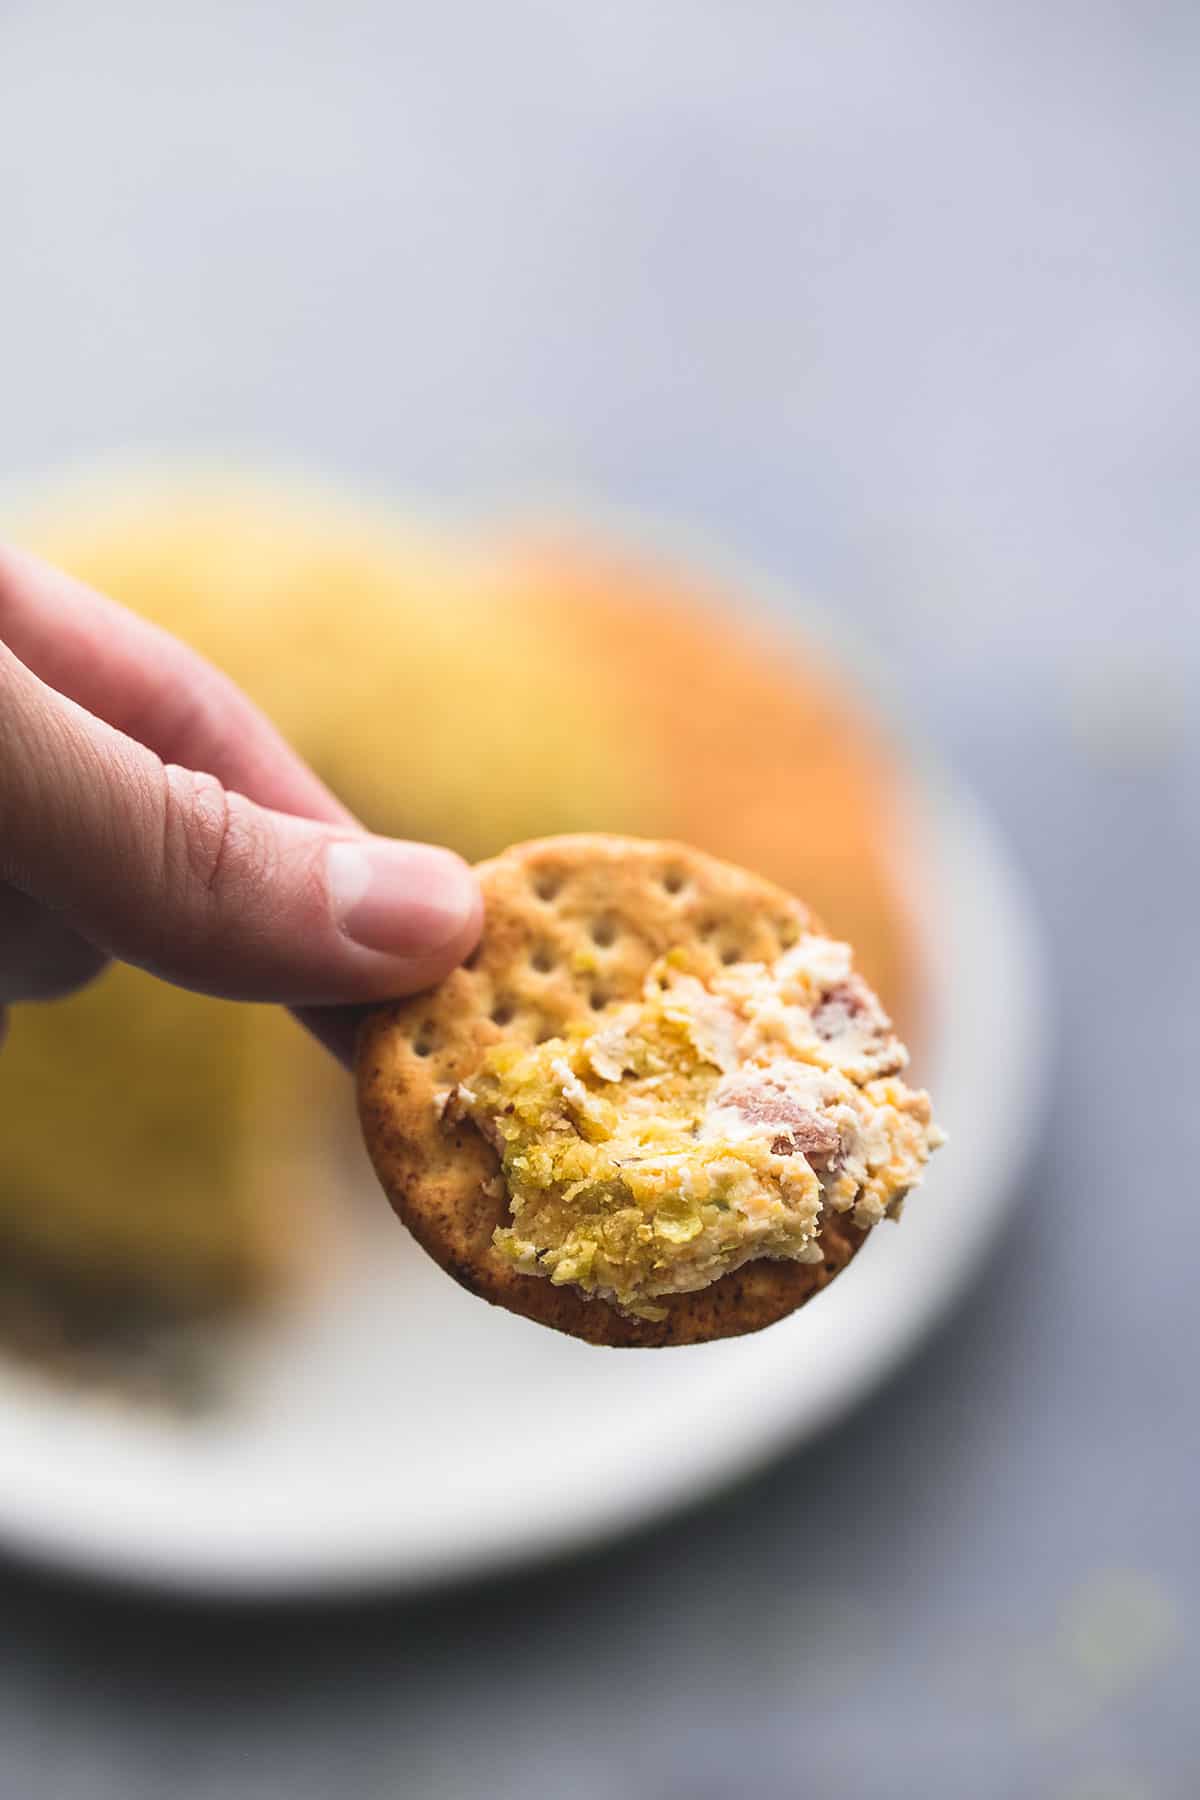 a hand holding a cracker dipped in cheddar bacon jalapeno cheeseball.